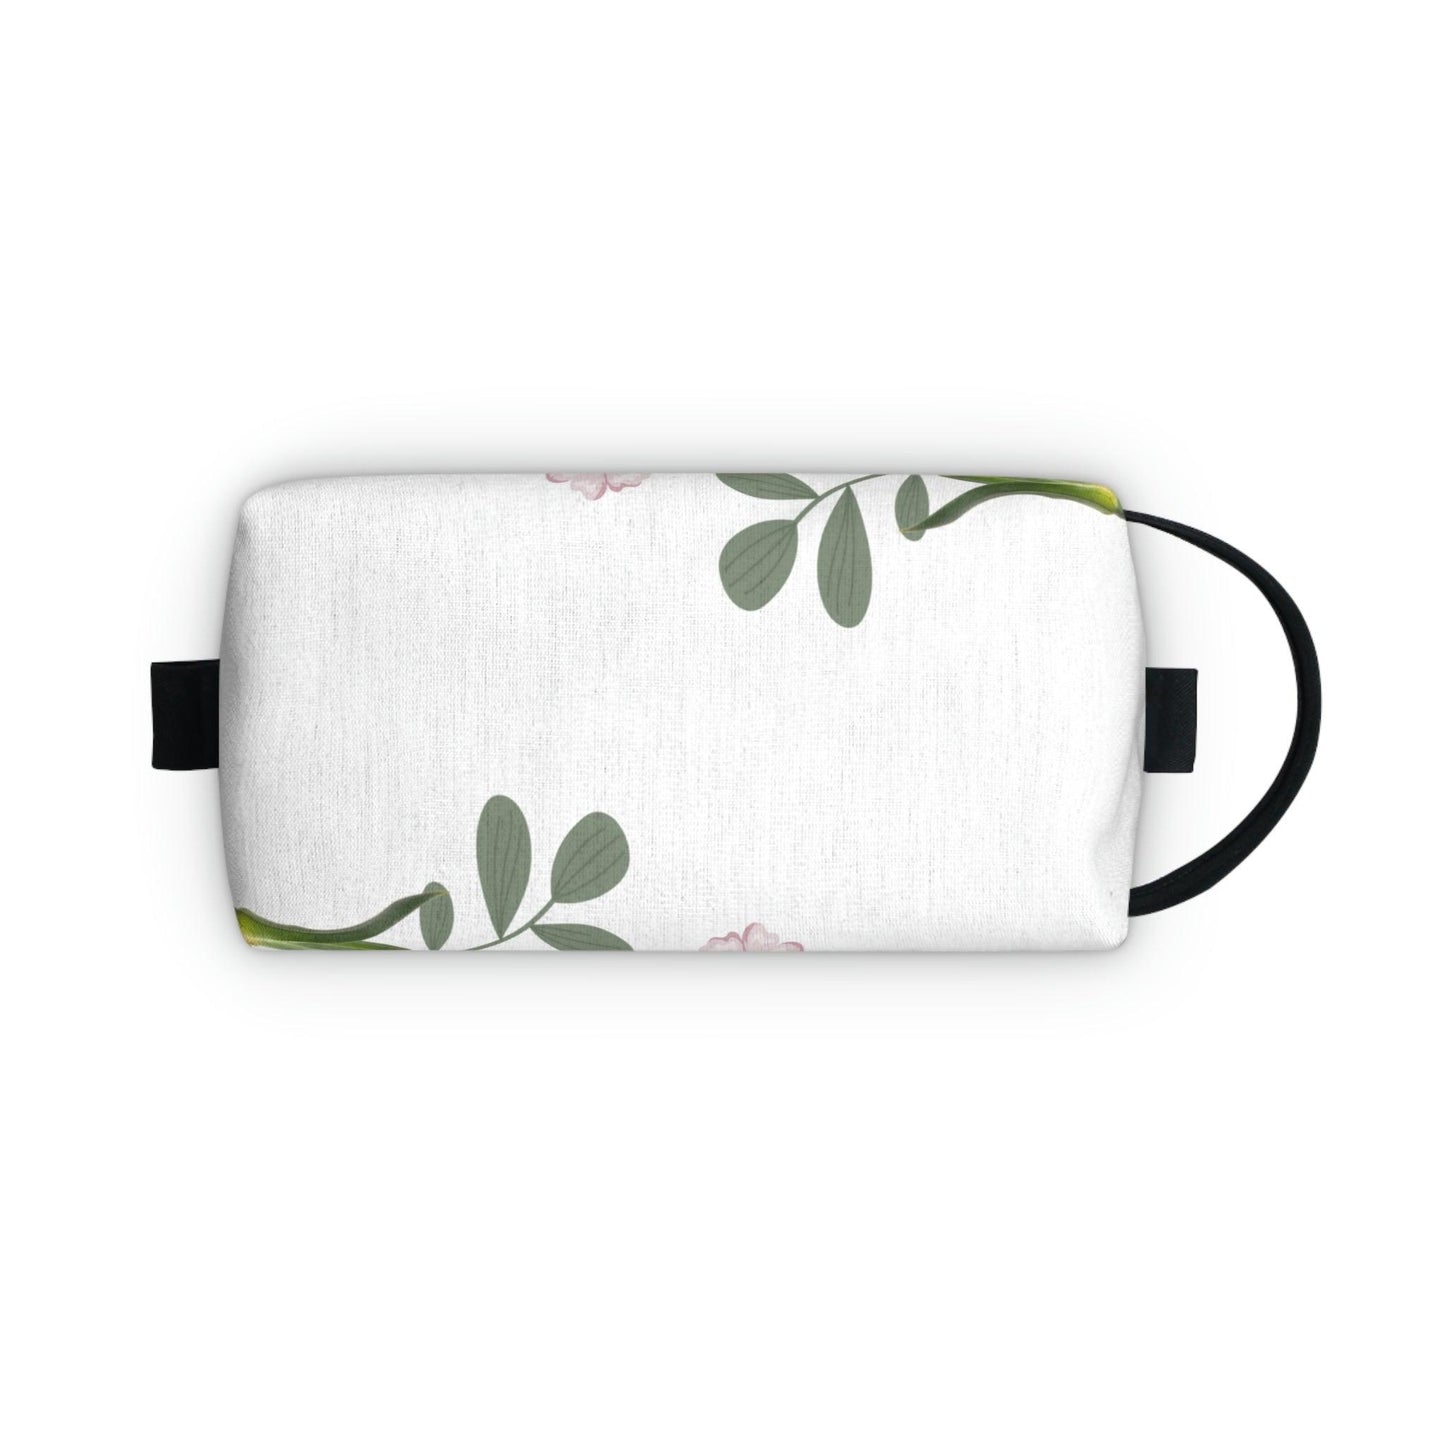 Personalized Makeup Bags | Cosmetic Bags | Floral Makeup Bag | flower makeup bag | Cosmetic Bag | floral Toiletry Bag | makeup pouch | bridal party bags, - Giftsmojo